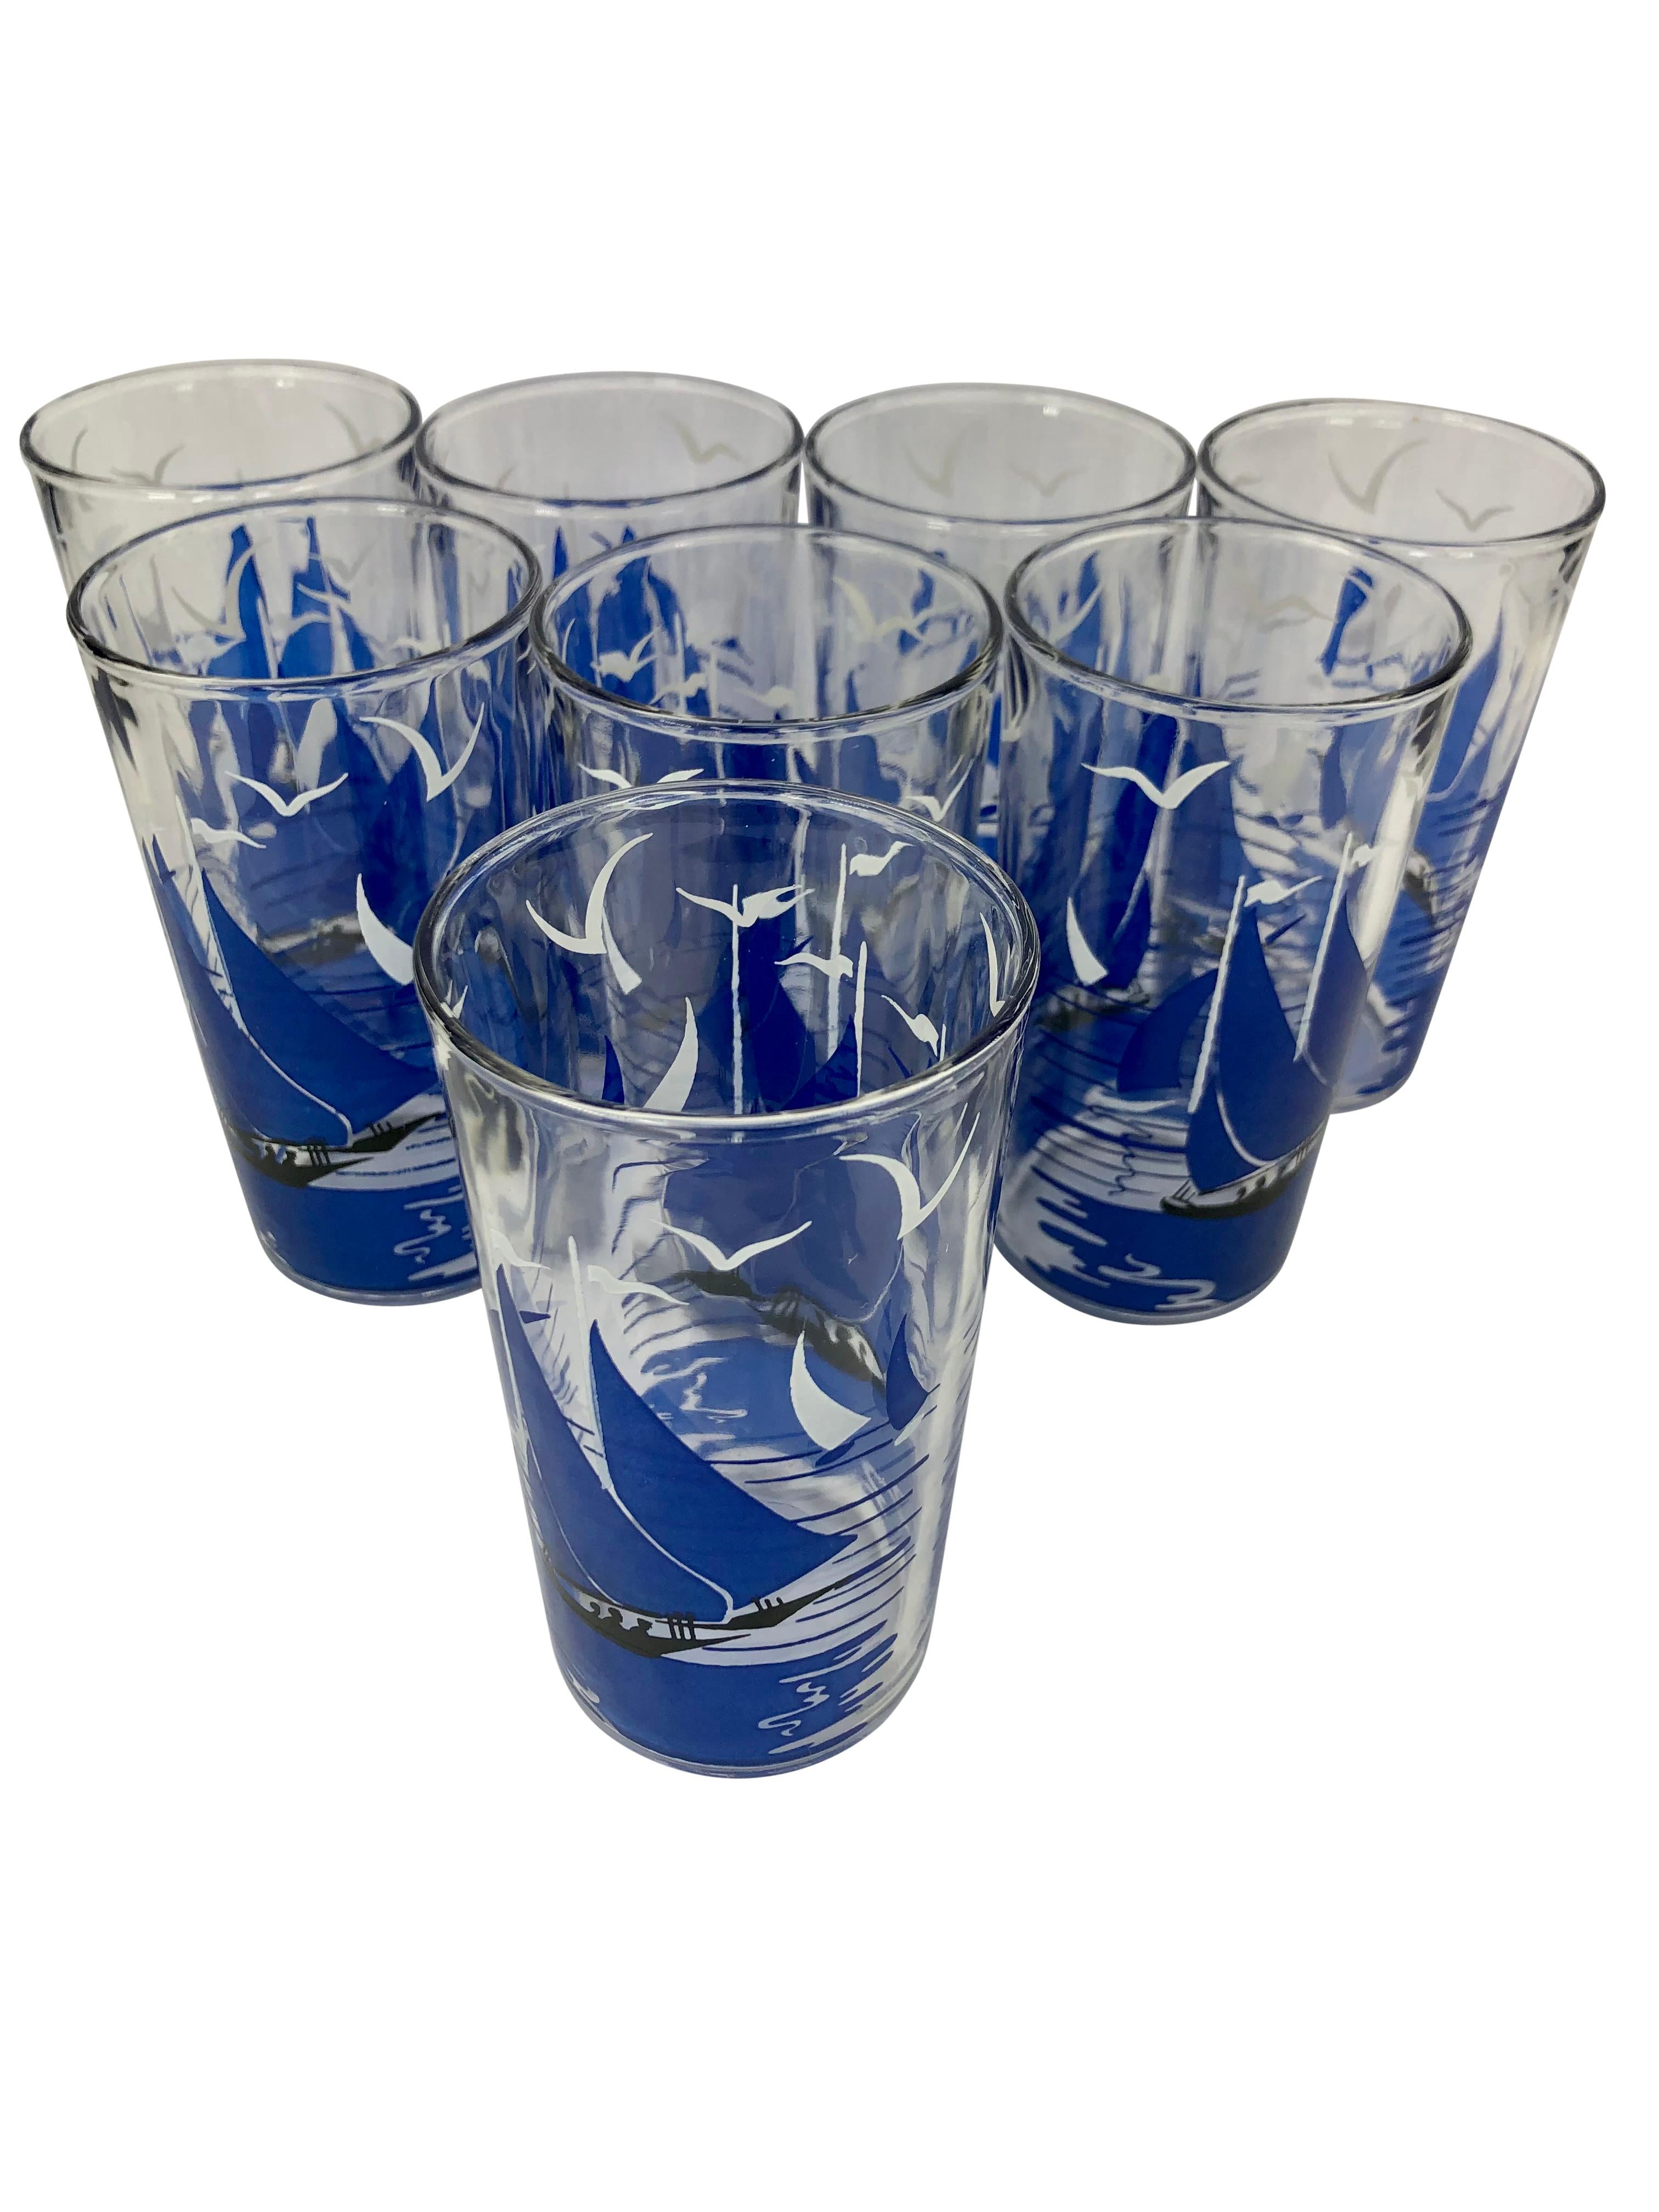 Set of 8 Vintage Tumblers in a Boat-Shaped Caddy. Glasses are decorated with blue sailboats in the ocean and white birds in the sky. Glasses measure 4 3/4